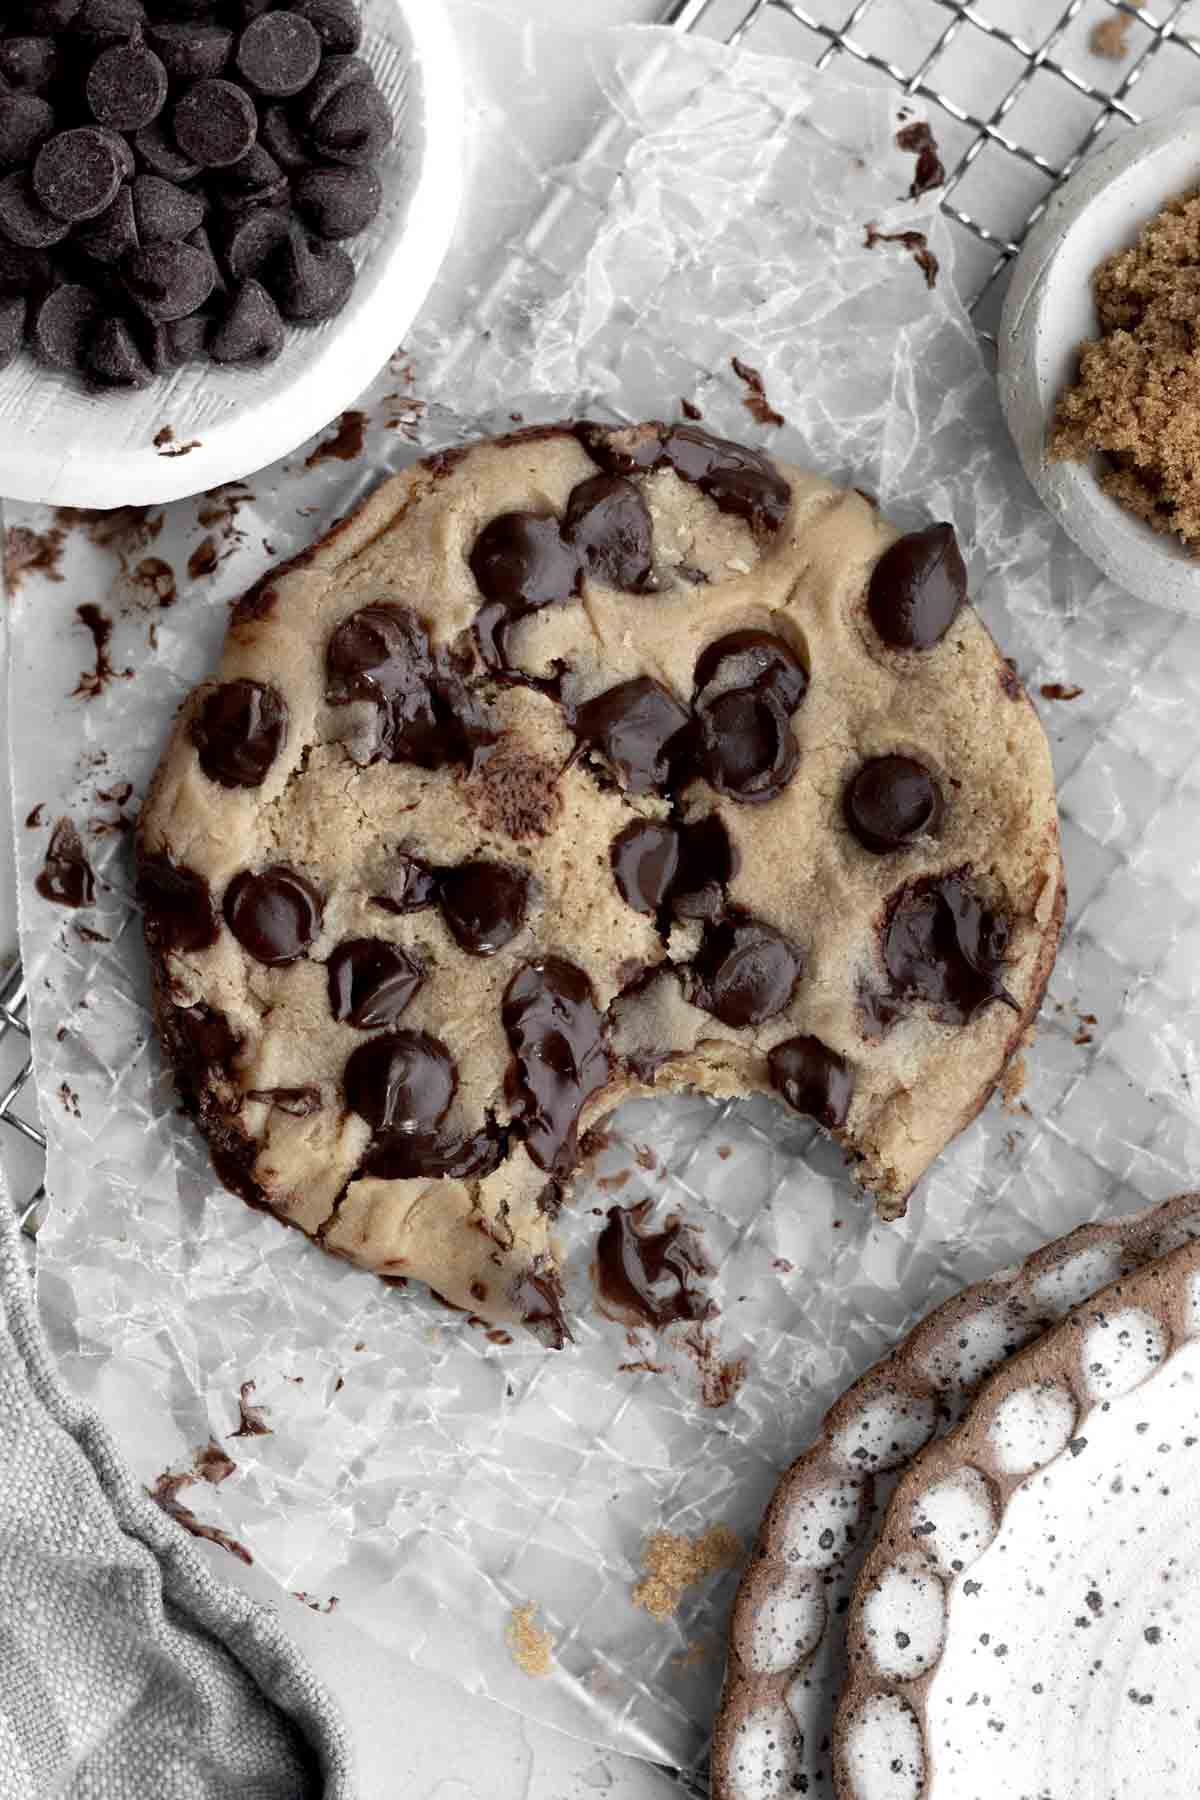 A Microwave Chocolate Chip Cookie with a bite taken, ready to be continued to be enjoyed.